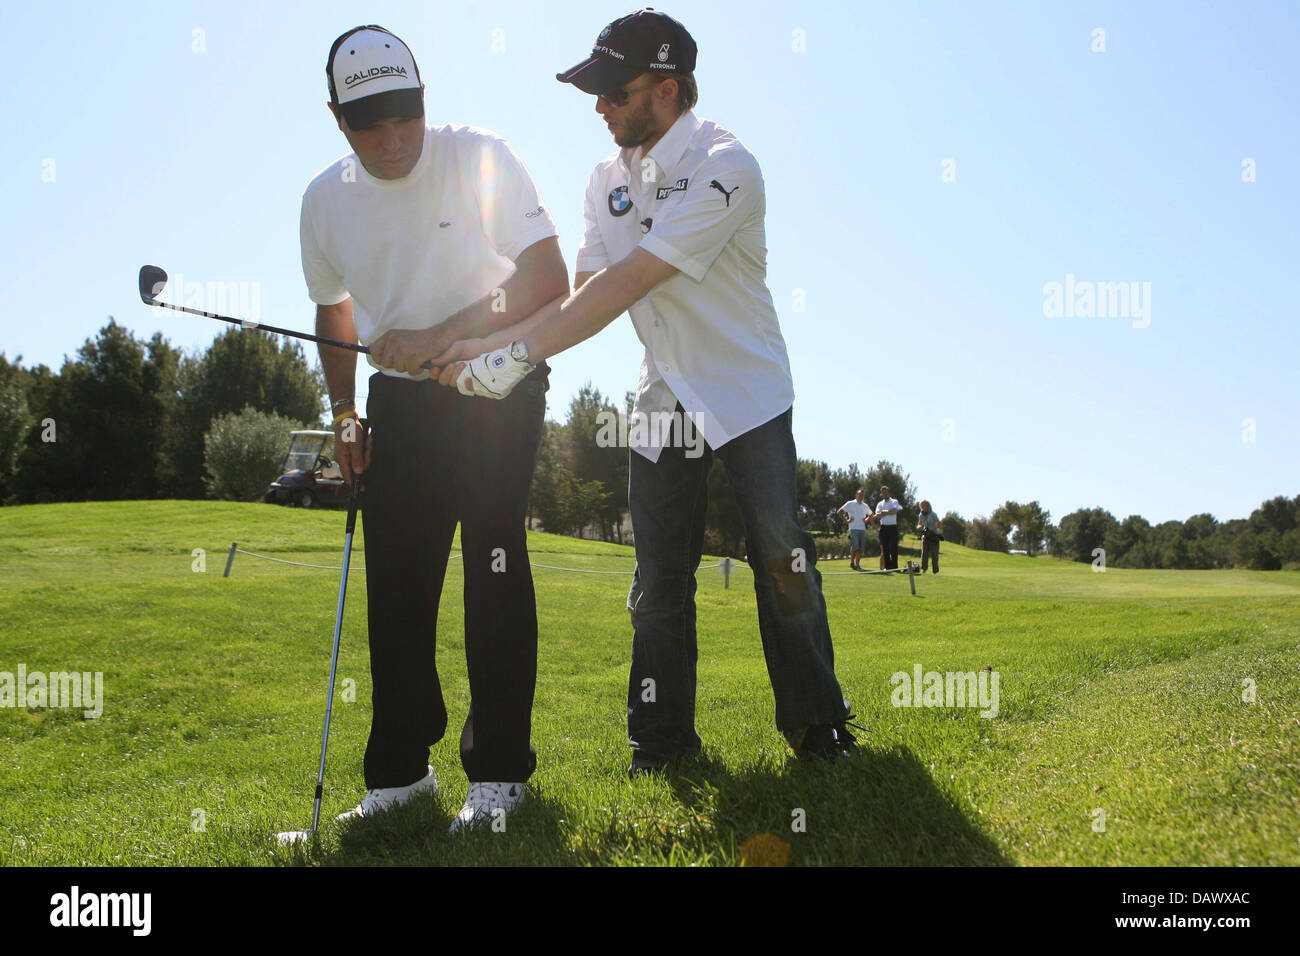 German Formula One pilot Nick Heidfeld of BMW Sauber team (R) and Spanish golf pro Jose Manuel Lara are pictured on a golf course near Valencia, Spain, Wednesday, 09 May 2007. Heidfeld participates in the BMW Sports Challenge with golfing and sailing. The Spanish Grand Prix takes place near Barcelona from 12 to 13 May. Photo: Jens Buettner Stock Photo